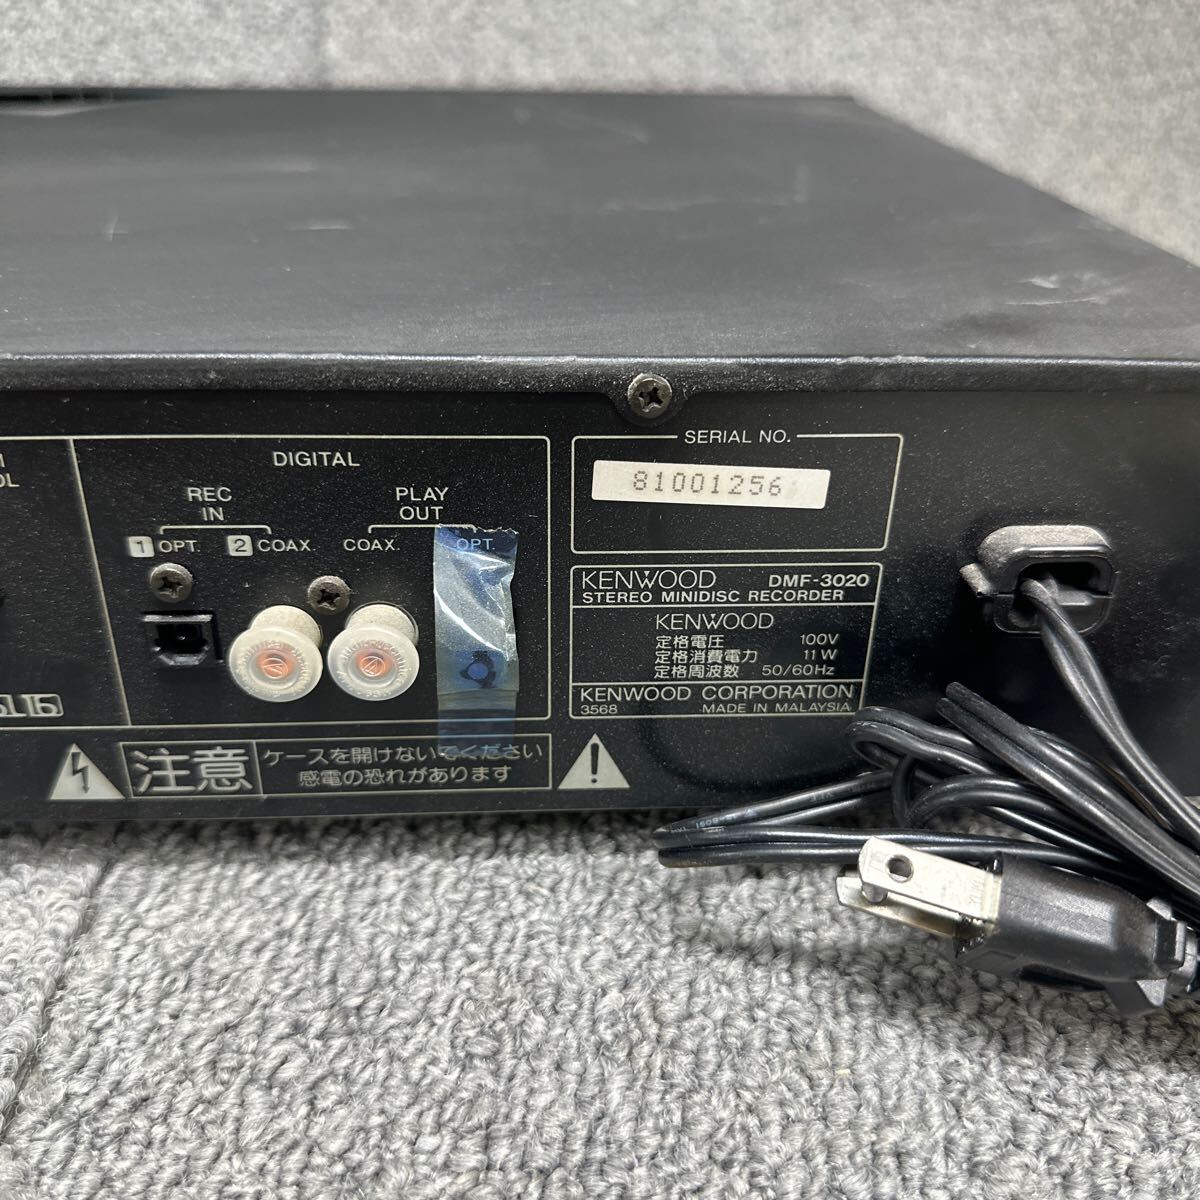 MYM5-151 super-discount MD deck KENWOOD DMF-3020 STEREO MINIDISC RECODER recorder Kenwood electrification OK used present condition goods *3 times re-exhibition . liquidation 